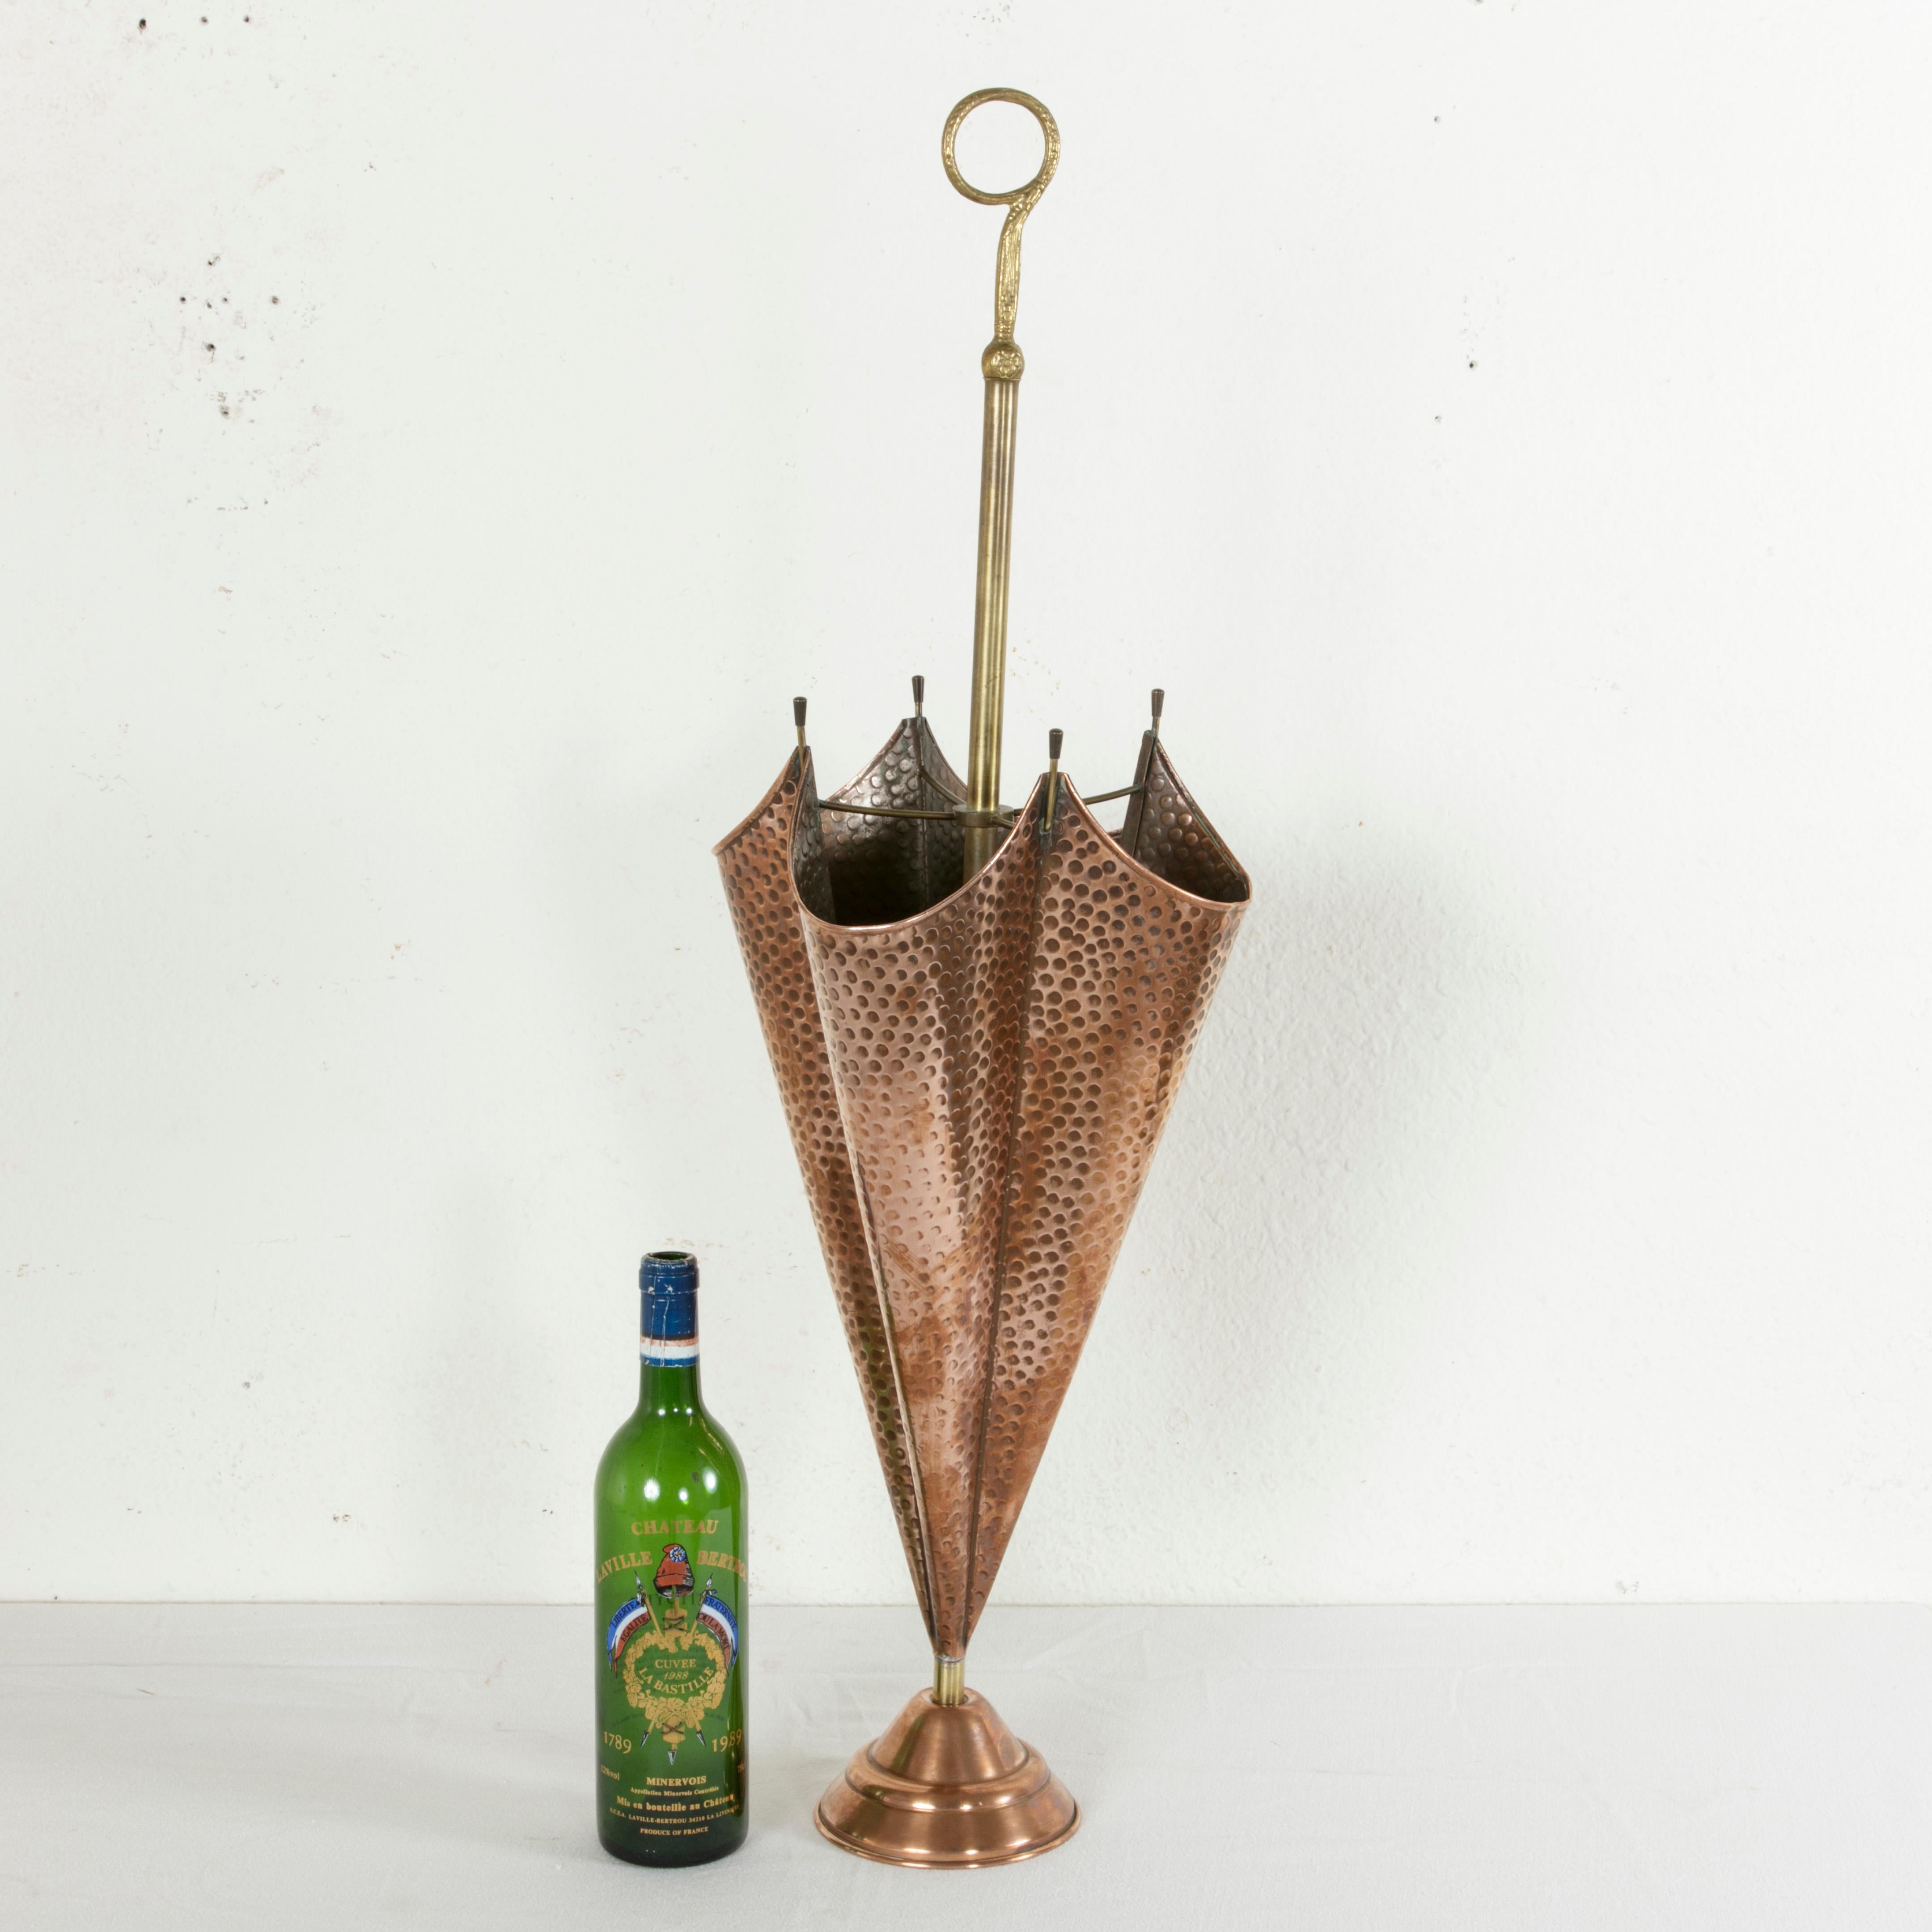 This midcentury copper and brass umbrella stand takes the form of an open umbrella resting on a copper footed base. The umbrella form is dimpled to mimic hand hammering, and the handle is in the form of a spiraled ring. Its narrow diameter and